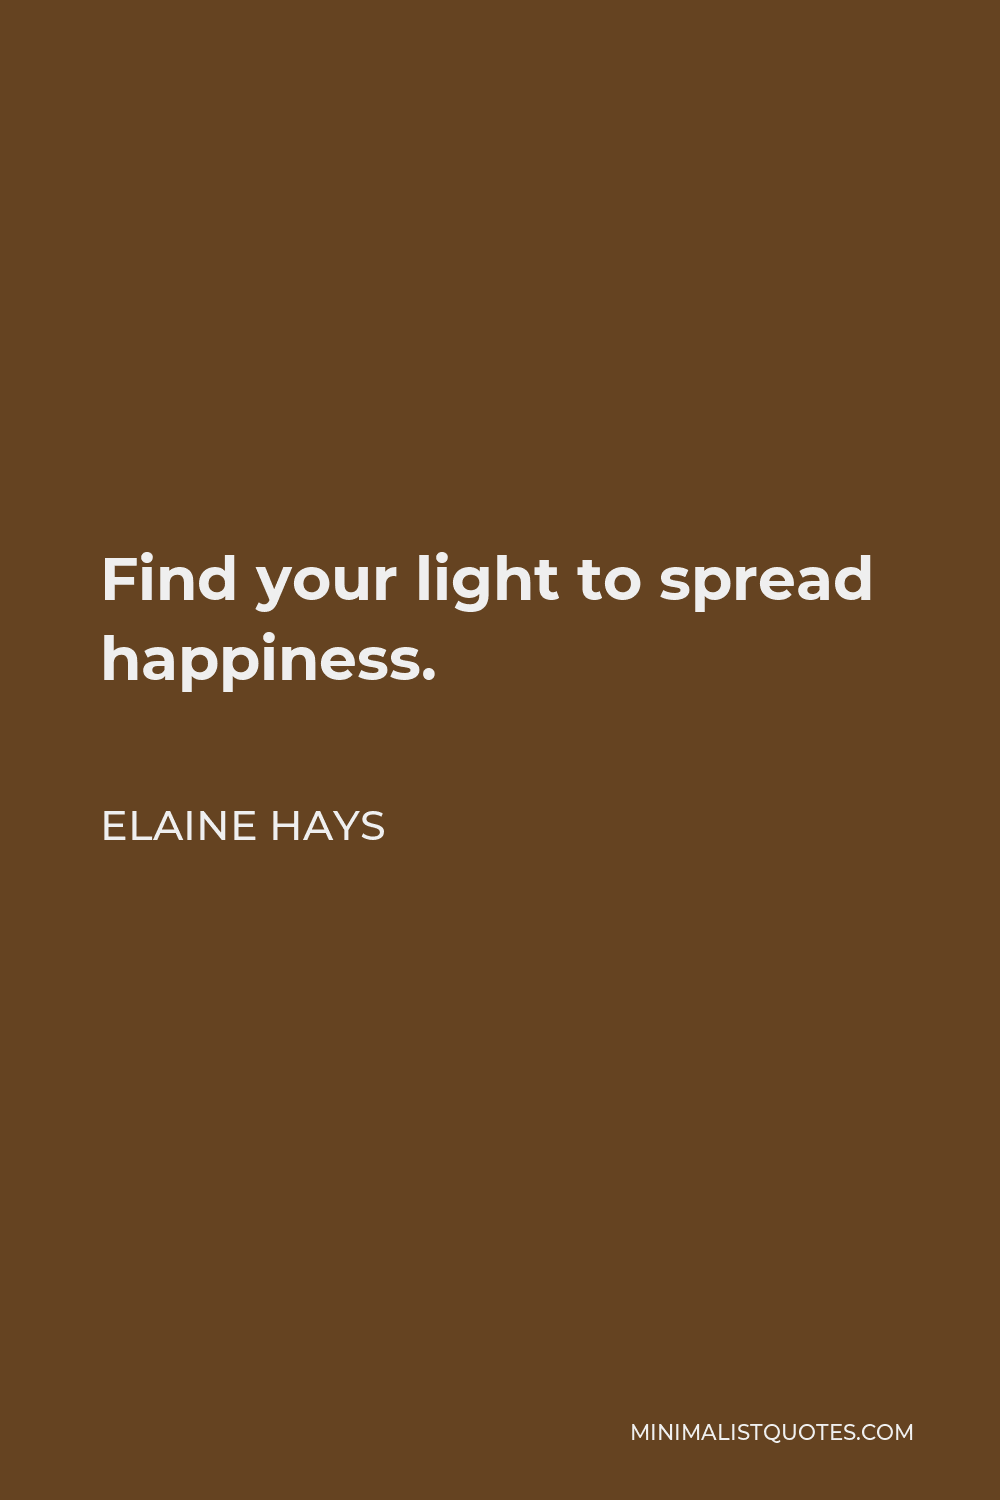 Elaine Hays Quote Find Your Light To Spread Happiness